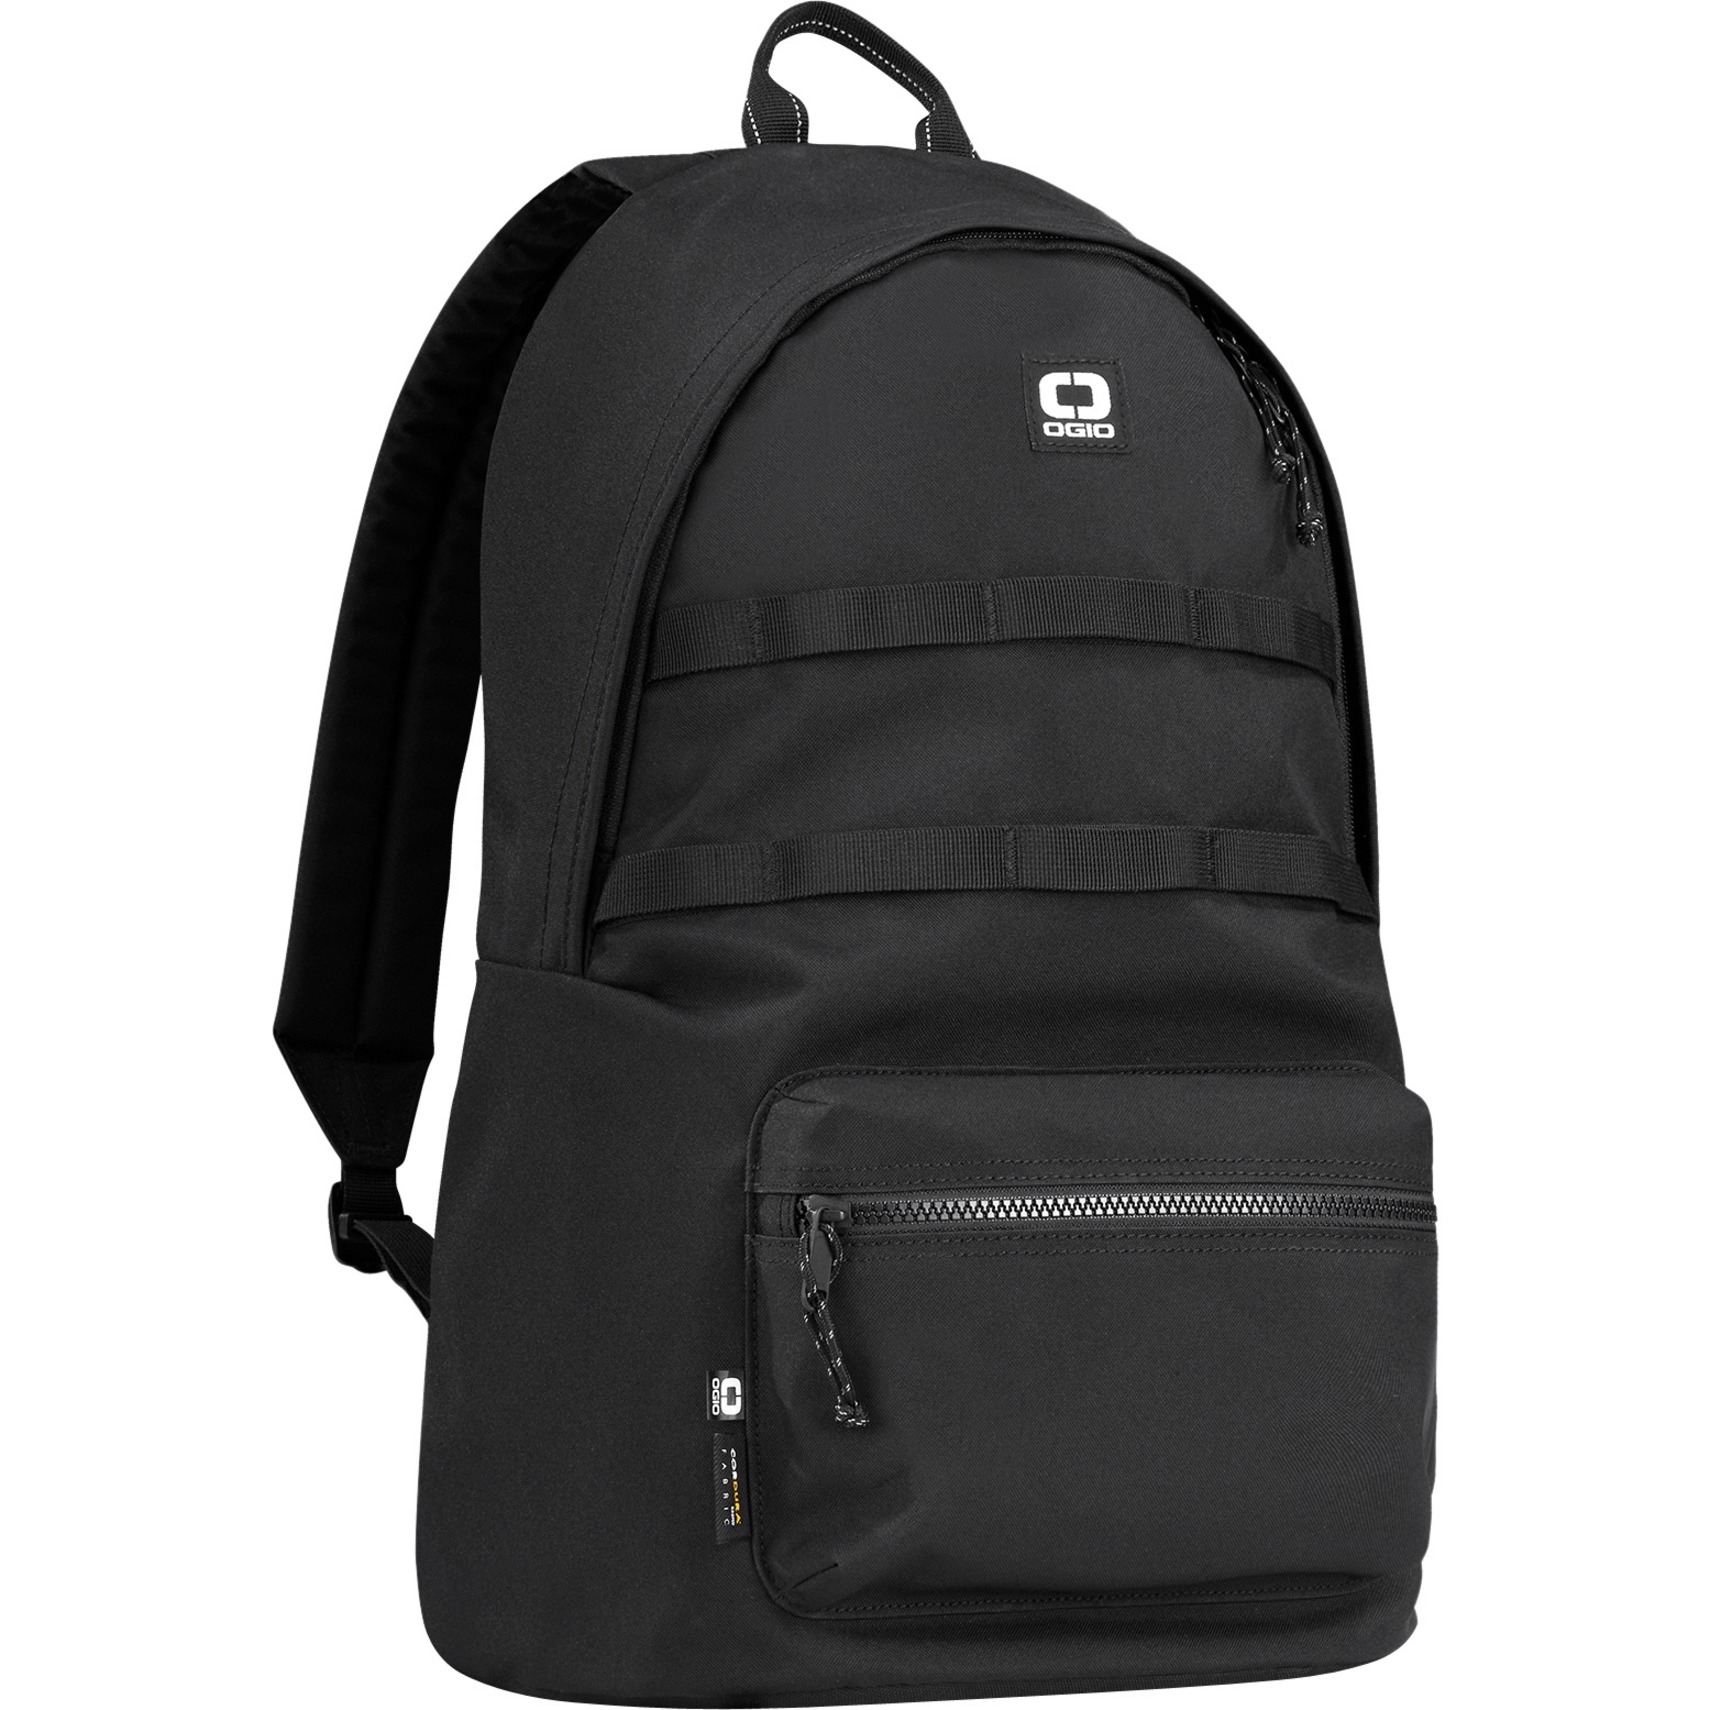 Ogio ALPHA Convoy 120 Carrying Case (Backpack) for 15" Notebook, Black - image 1 of 6